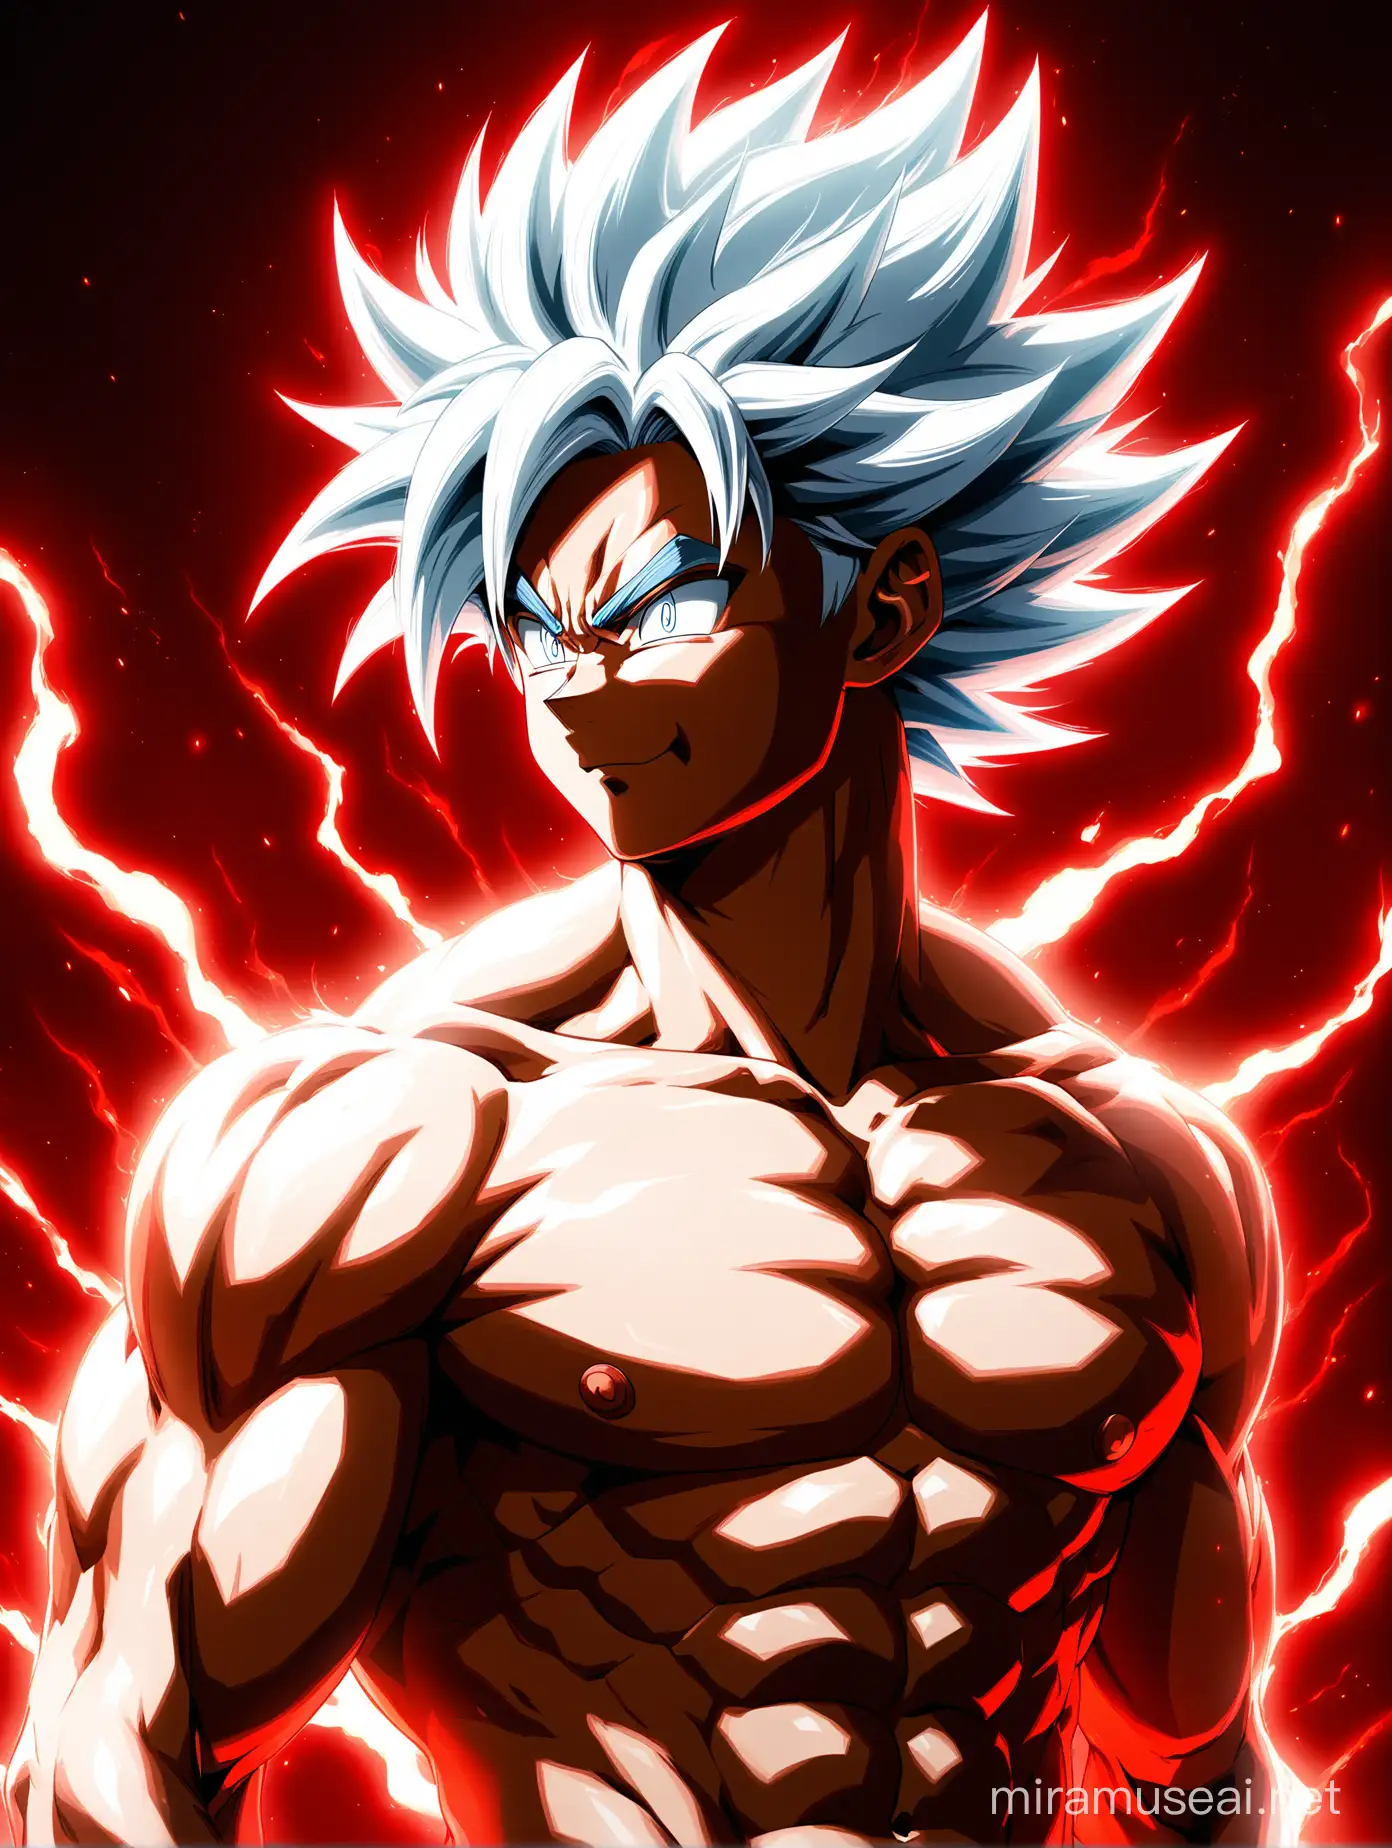 Shirtless Goku With a new white-red transformation with strong ultra white-red lighting aura, he's lean and vascular, he has white hair only no other colors, side view